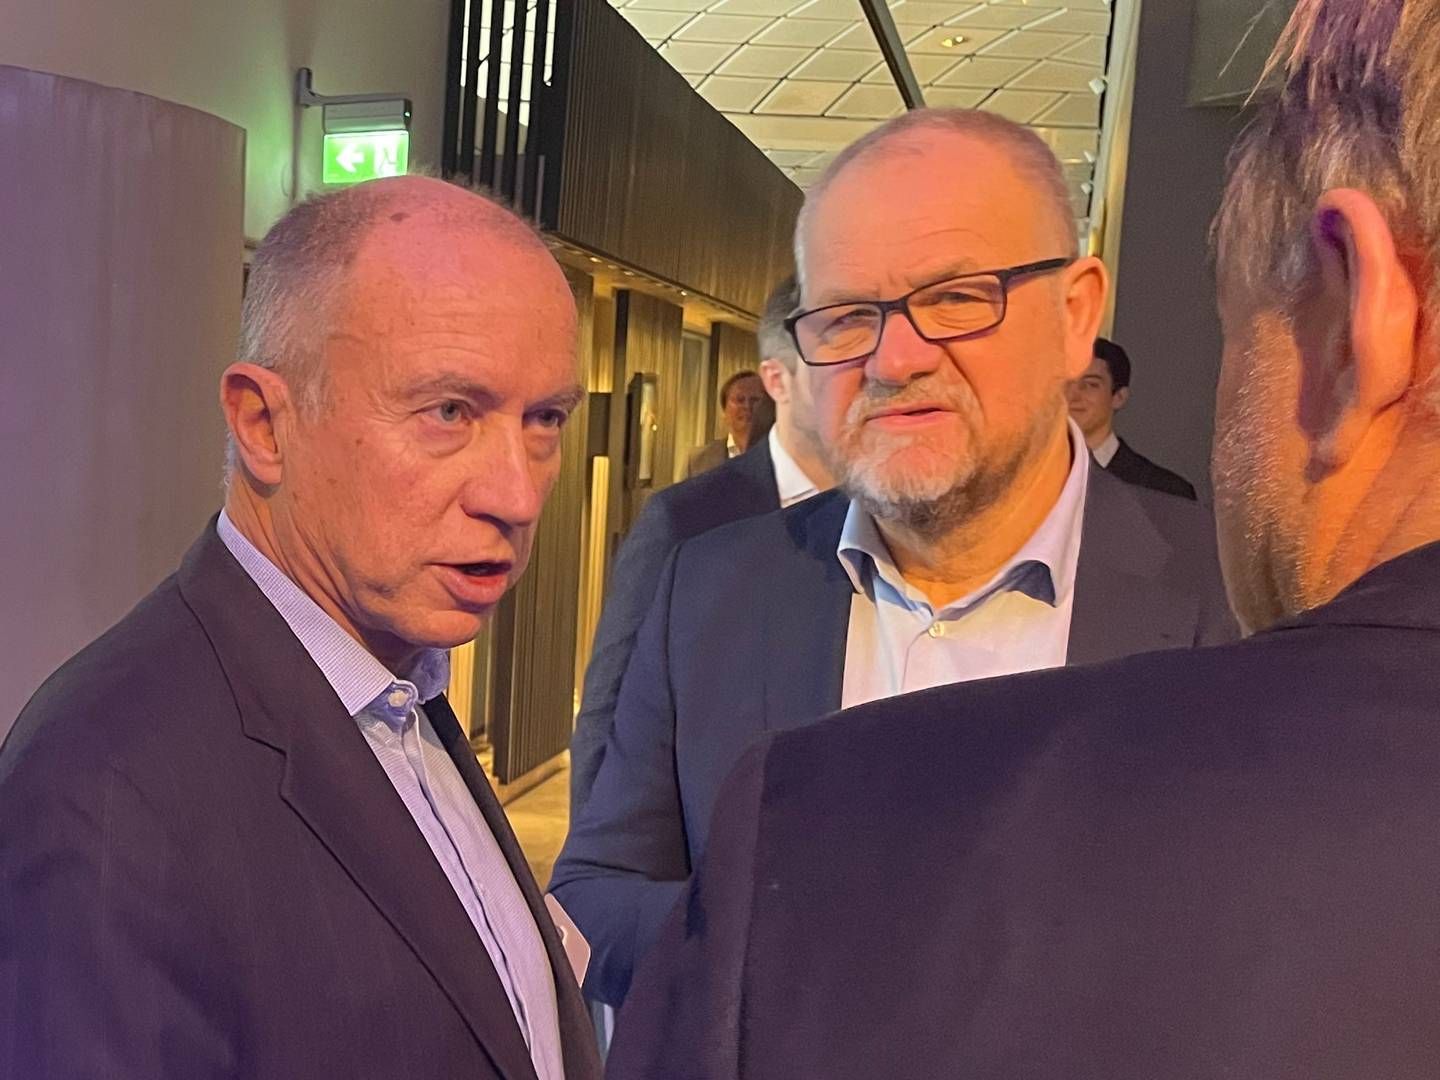 Geir Fuglseth (center) tells EnergyWatch that there are no changes in the Utsira Nord consortium, which Statkraft is part of. Christian Rynning-Tønnesen recently stepped down as Statkraft's CEO. The photo was taken during Pareto's conference on energy and renewable energy in Oslo earlier this year.